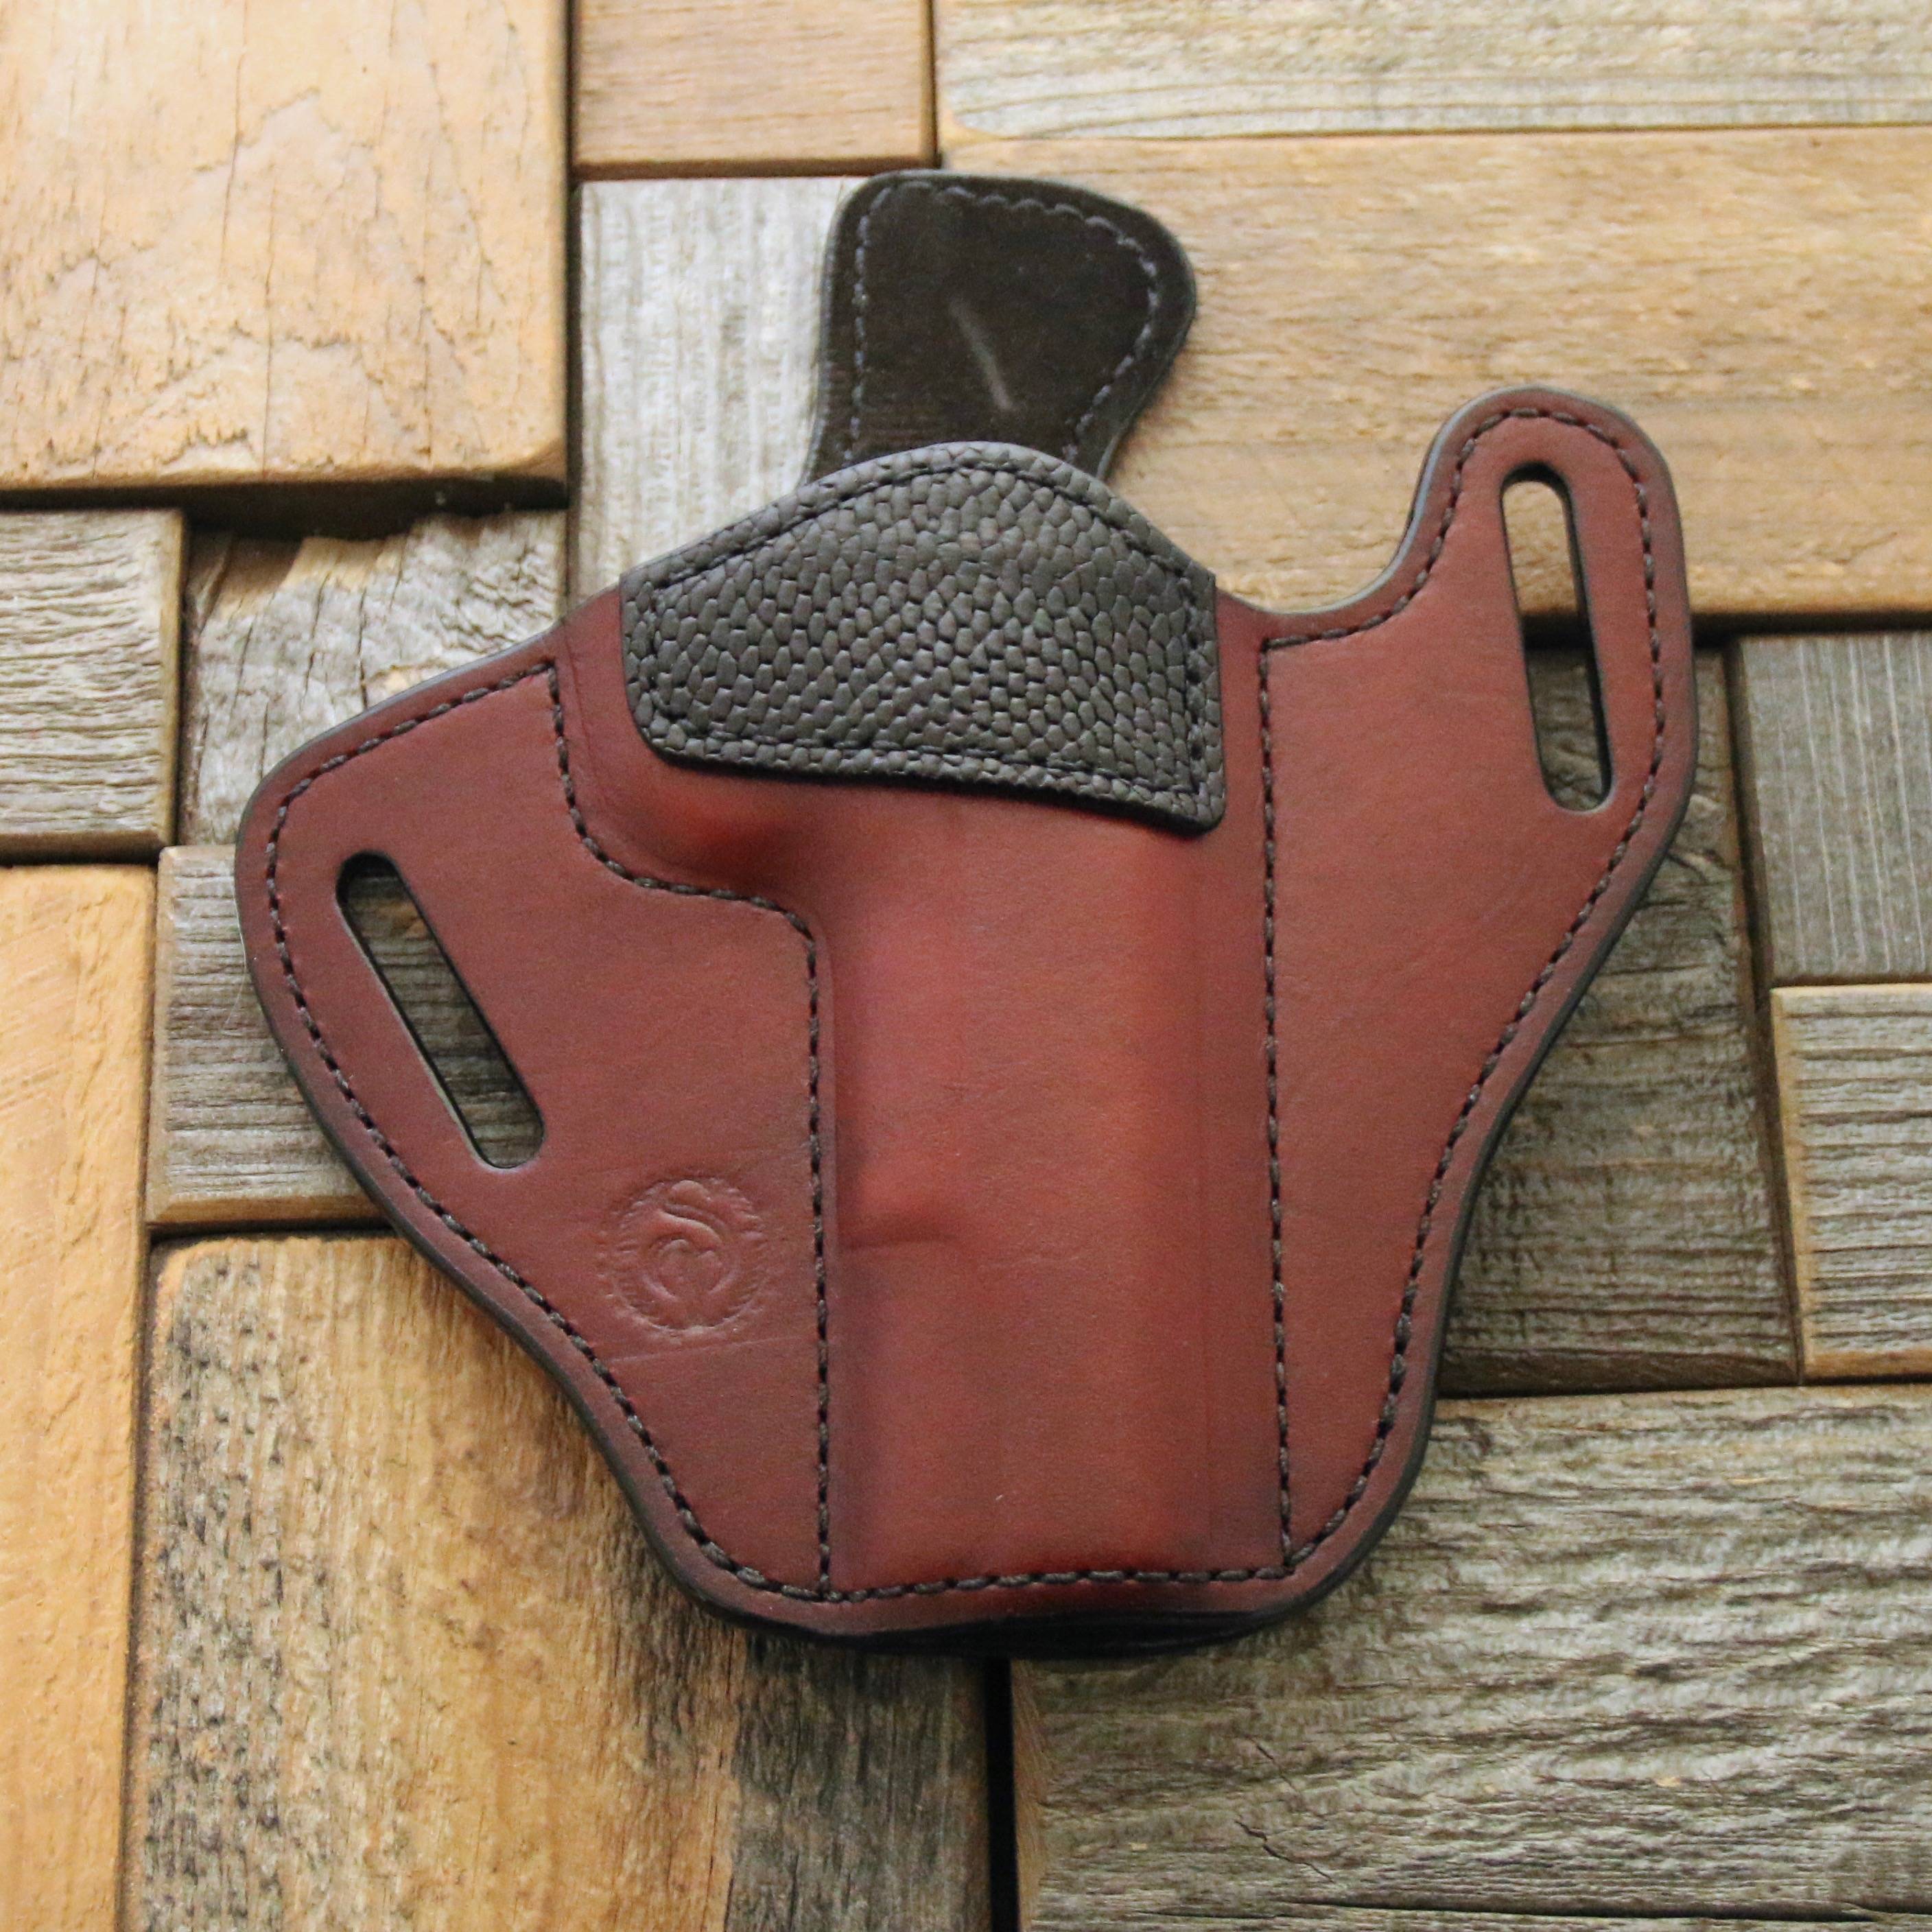 OWB holster for red dot sight